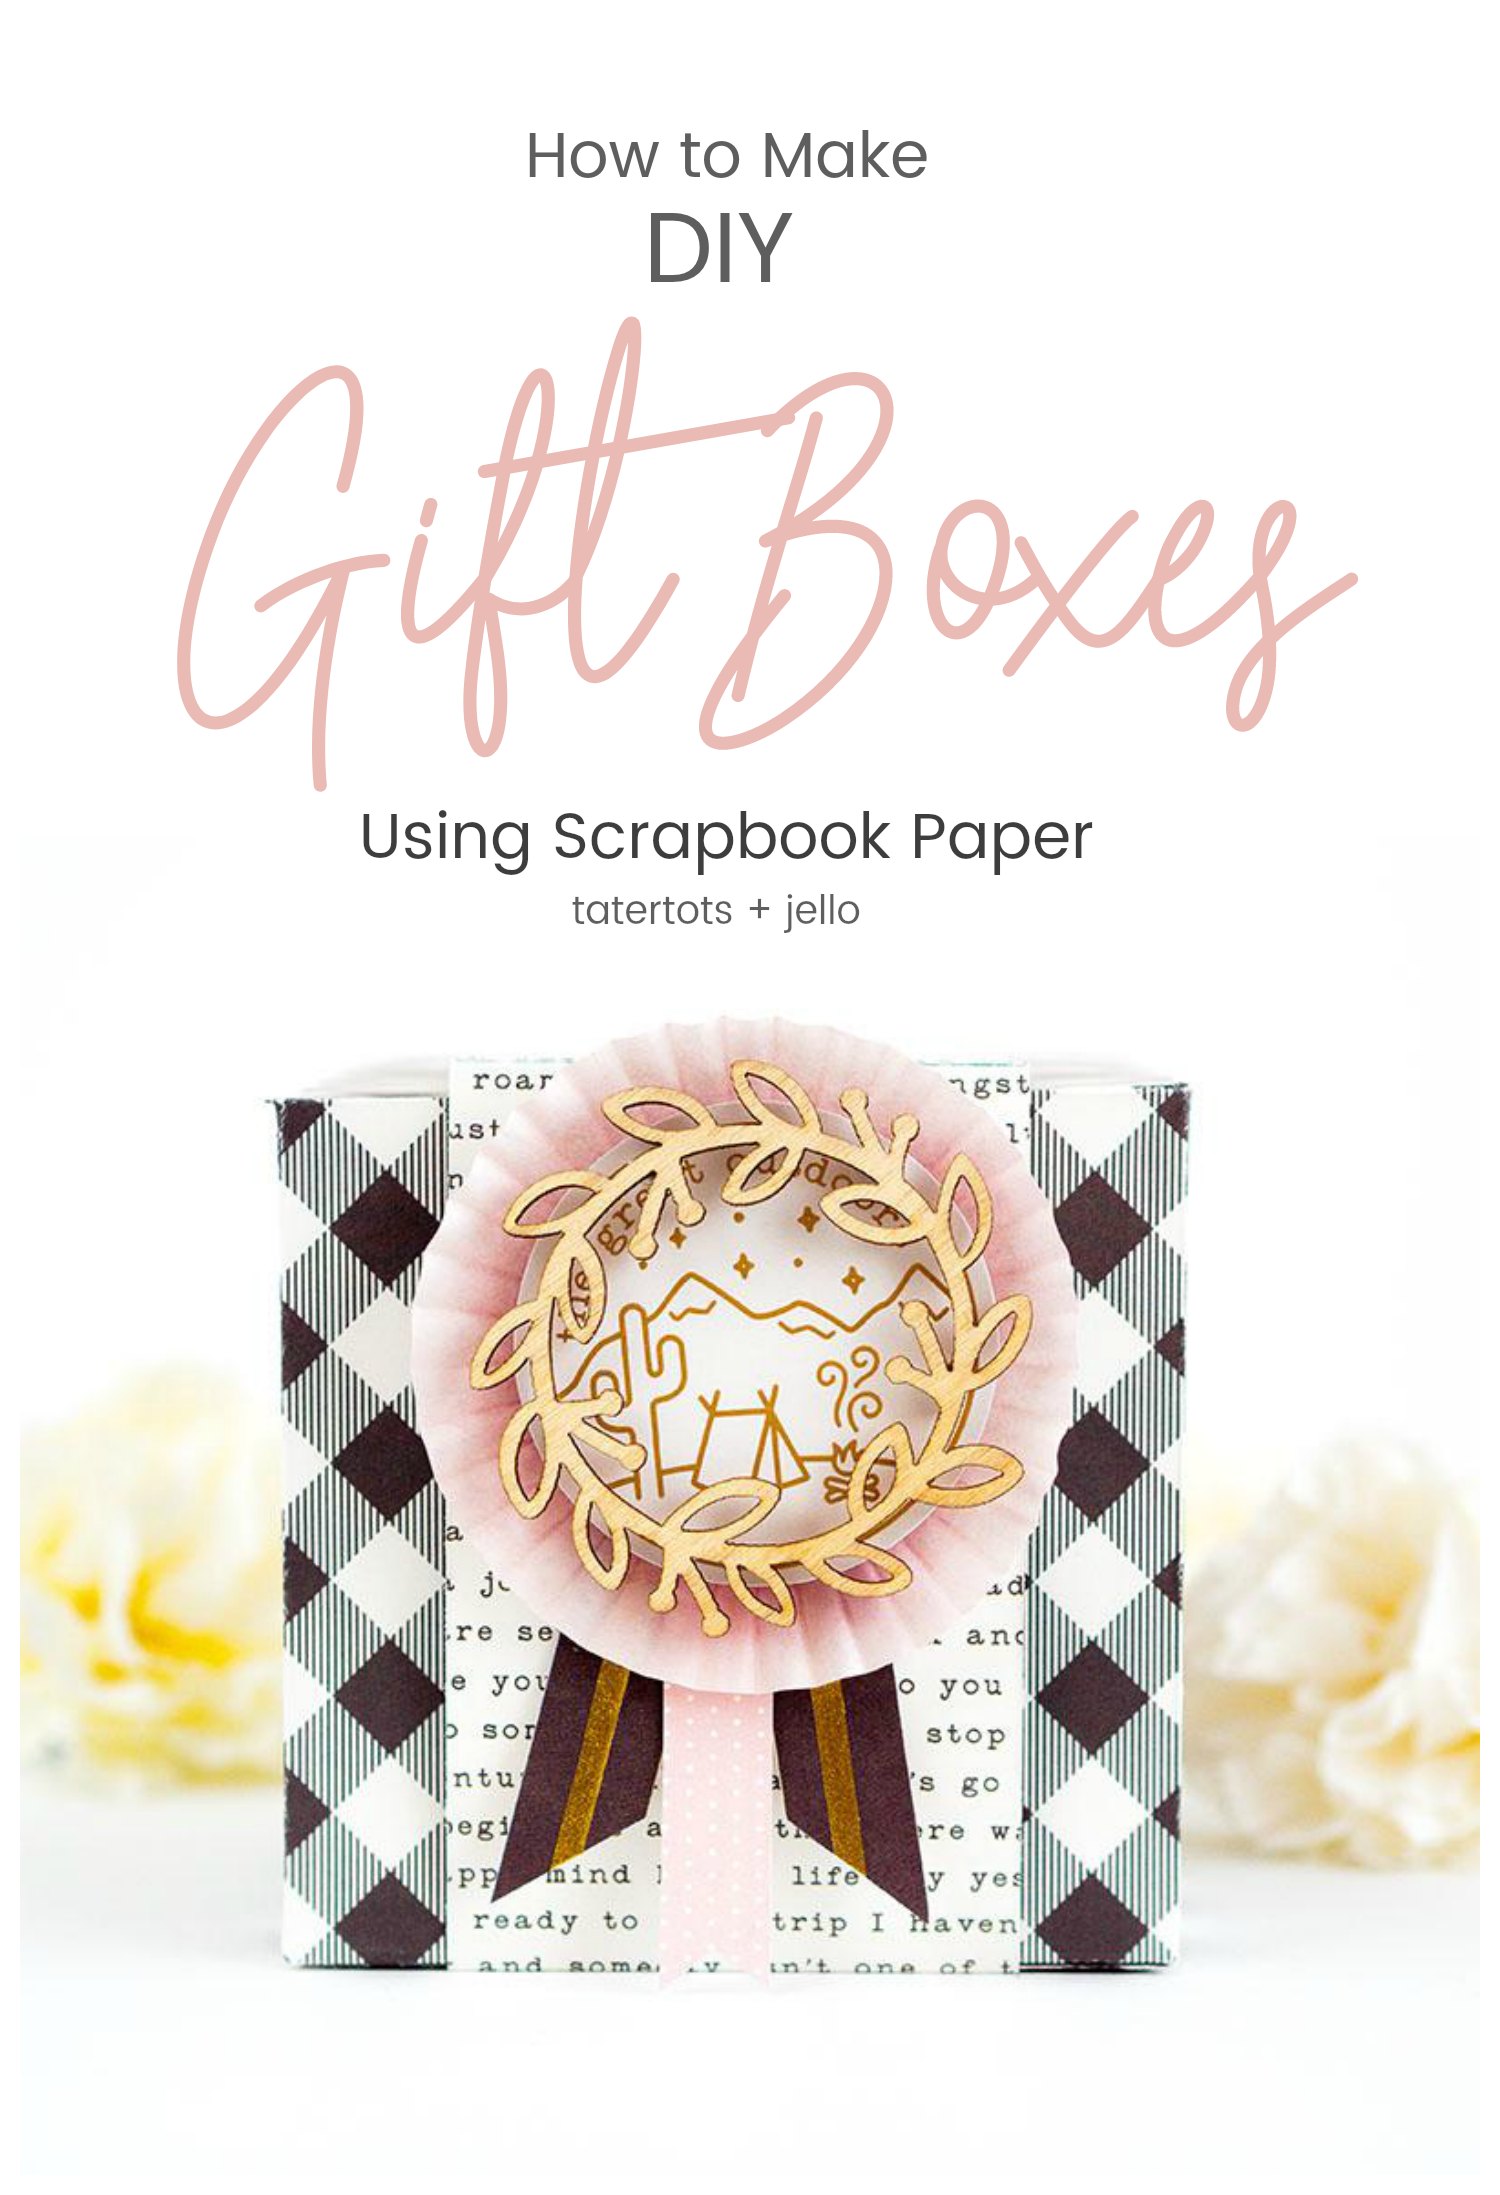 How to make DIY gift Boxes using scrapbook paper. Turn a piece of scrapbook paper into a darling gift box. It's so easy and perfect for any type of gift-giving! ﻿